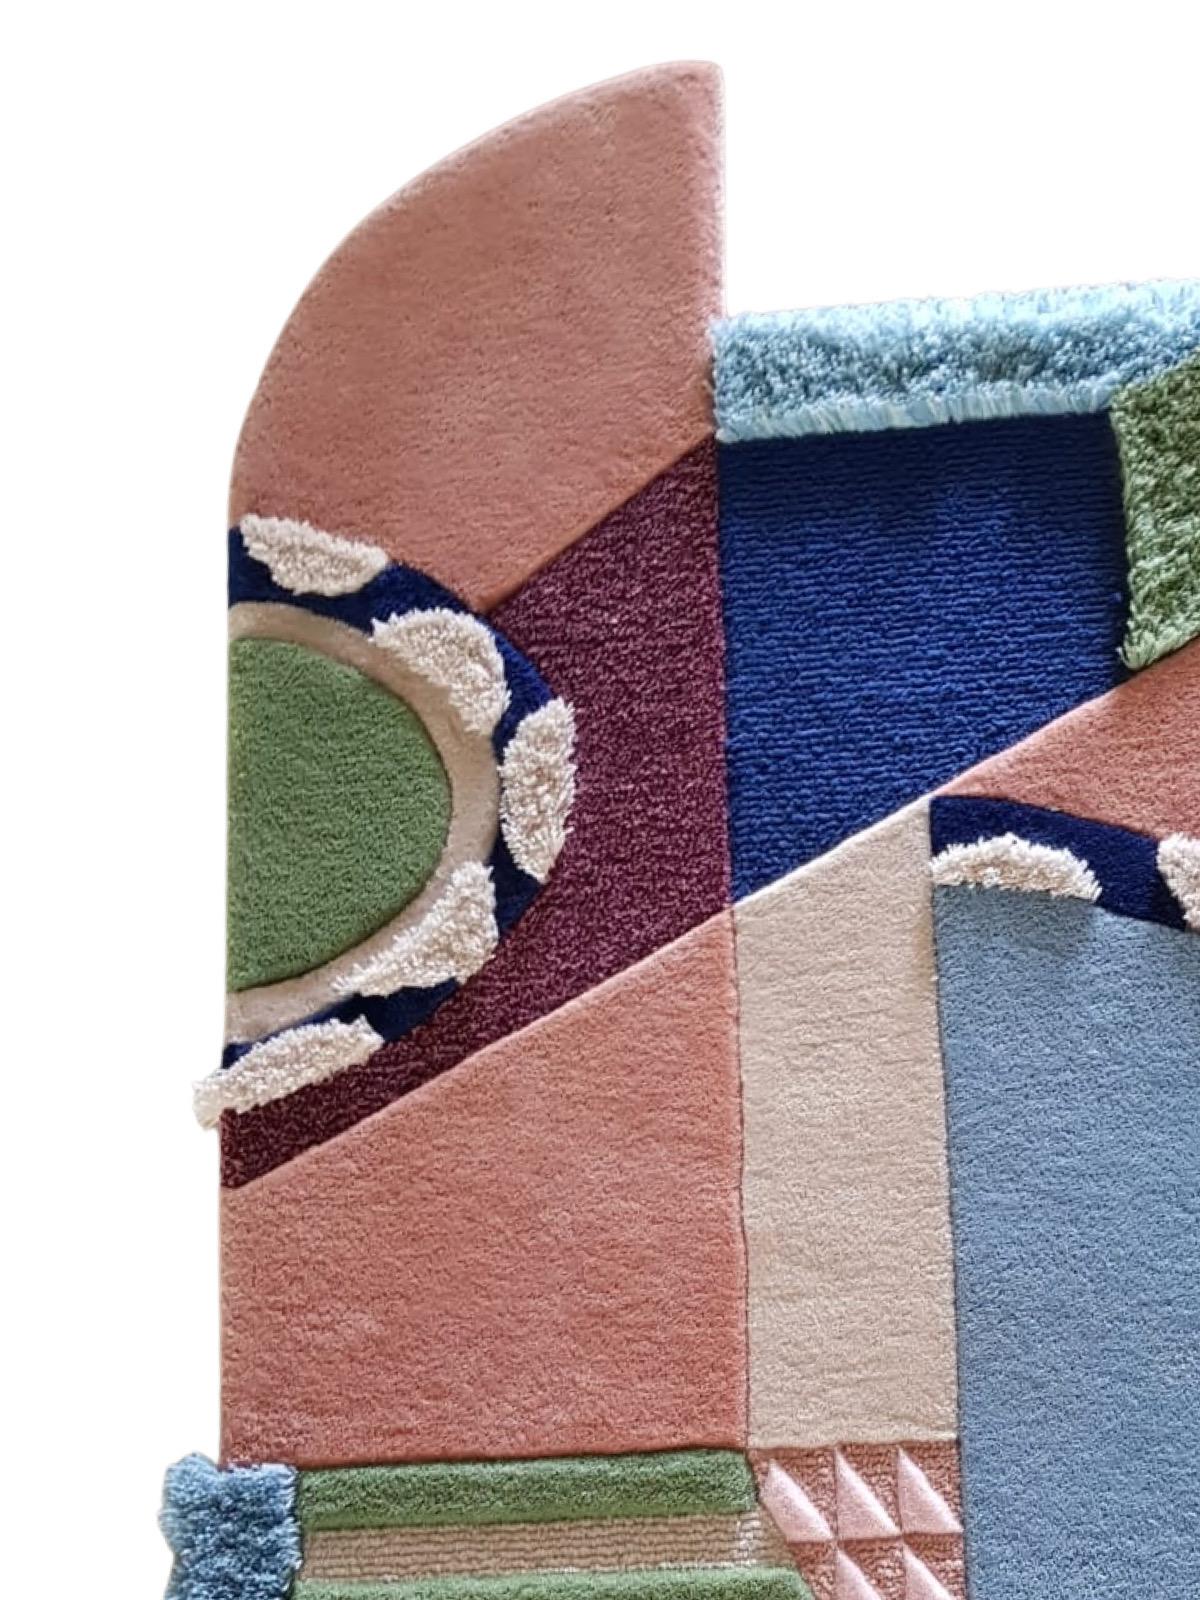 Hey Archie rug is made with a combination of pink blush, blue, green a touch of maroon 

Original Designed by RAG Home Jakarta
Hand-tufted Carpet with mixed Carving Embossed Methods and Colours. 
It can be customised in size. Made by order. Produced